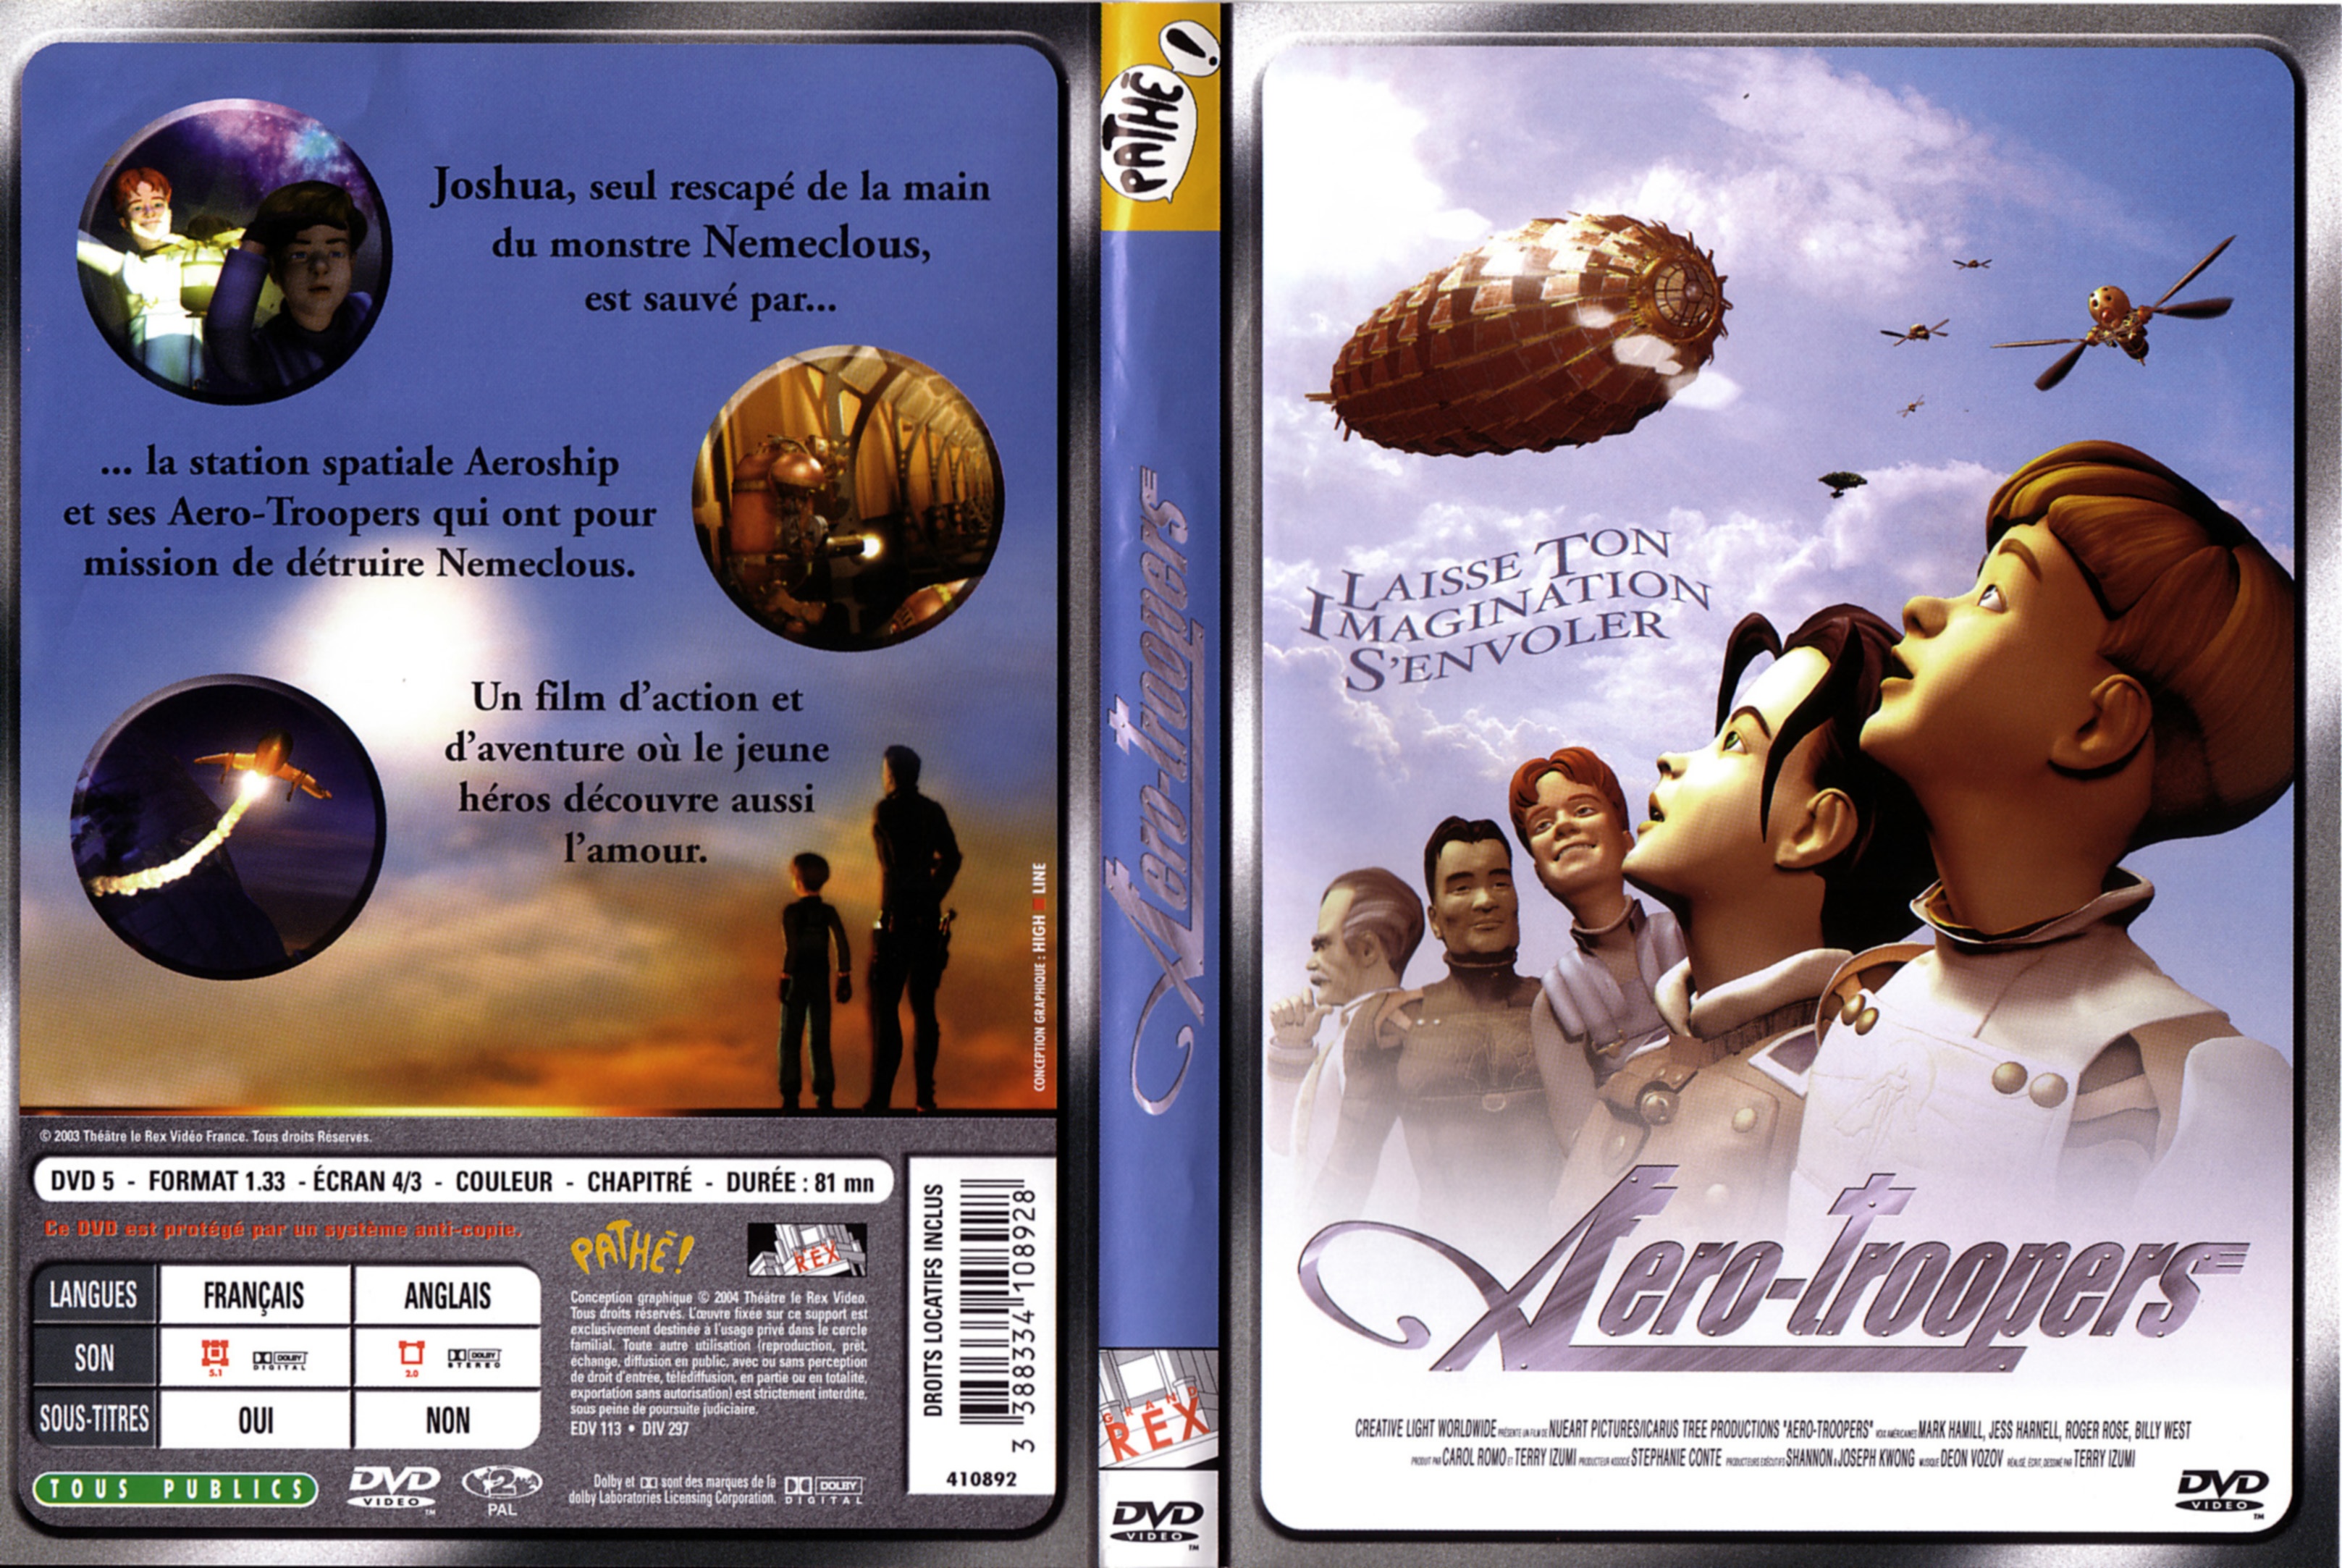 Jaquette DVD Aero troopers